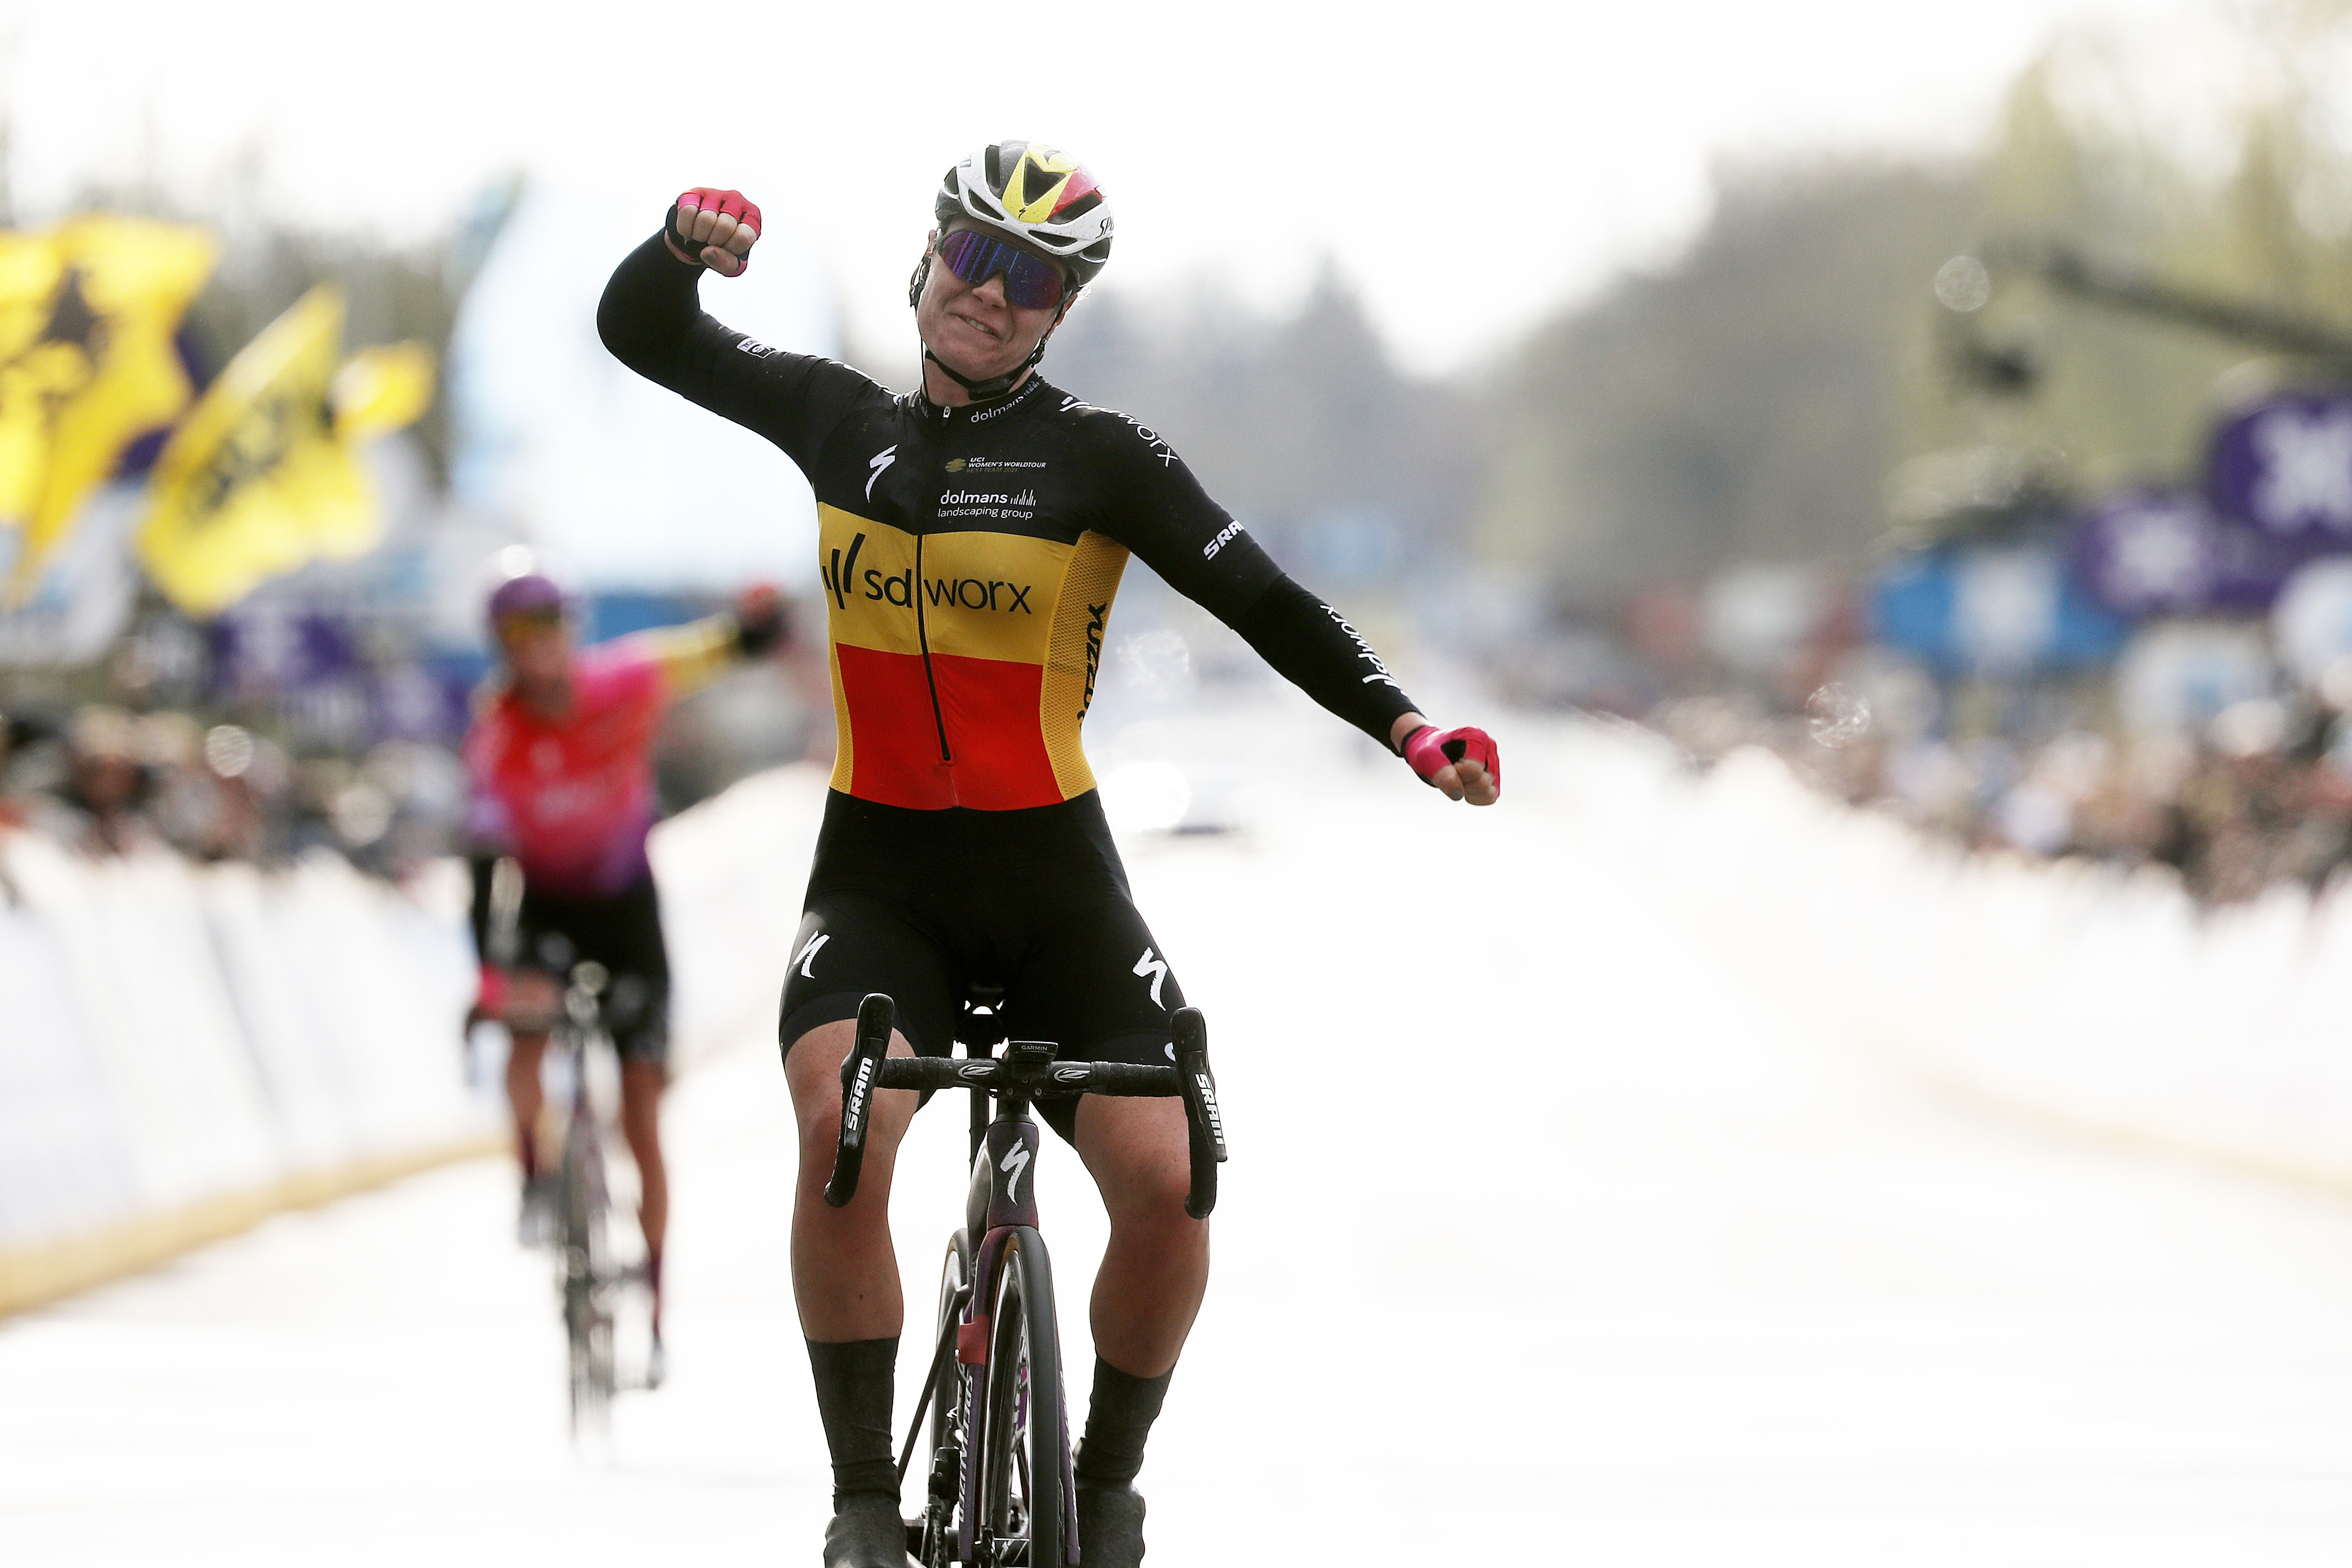 OUDENAARDE BELGIUM APRIL 03 Lotte Kopecky of Belgium and Team SD Worx celebrates winning during the 19th Ronde van Vlaanderen Tour des Flandres 2022 Womens Elite a 1586km one day race from Oudenaarde to Oudenaarde RVV22 RVVwomen on April 03 2022 in Oudenaarde Belgium Photo by Bas CzerwinskiGetty Images